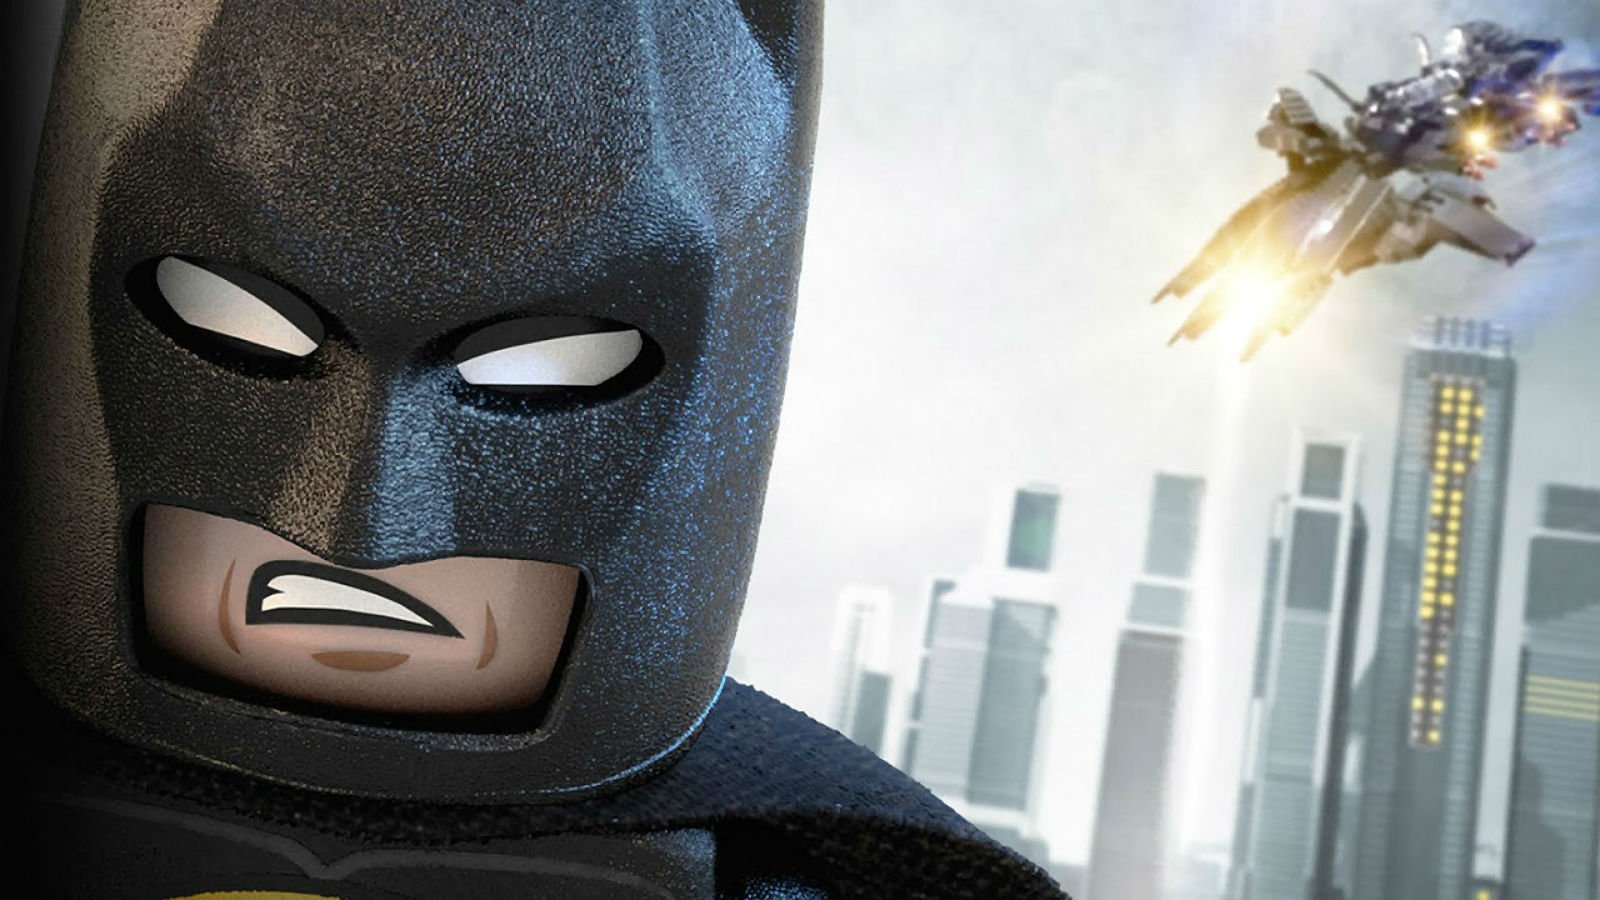 the lego batman movie online for free